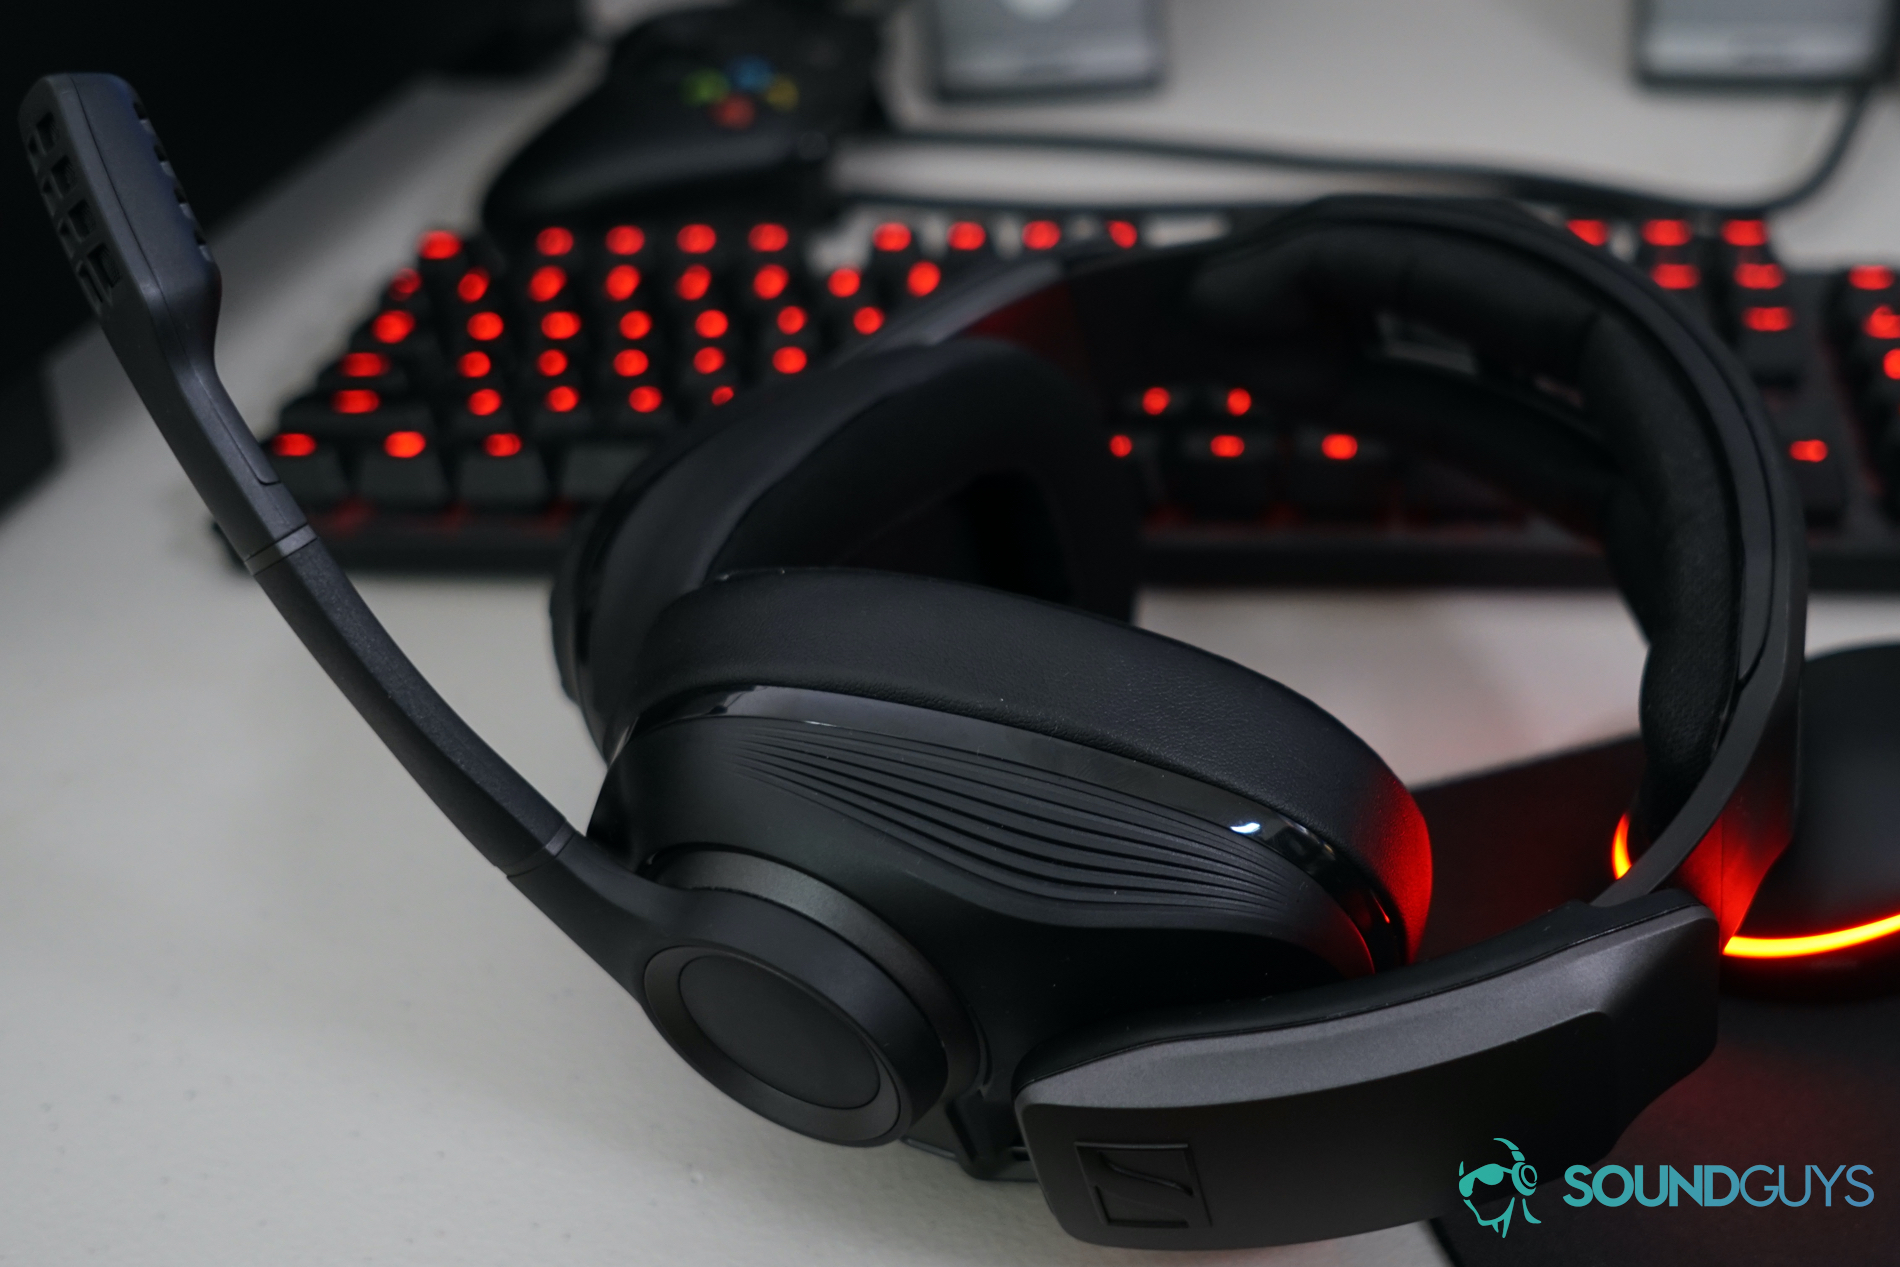 The Sennheiser GSP 670 gaming headset sits on a desk in front of a Logitech gaming mouse and keyboard